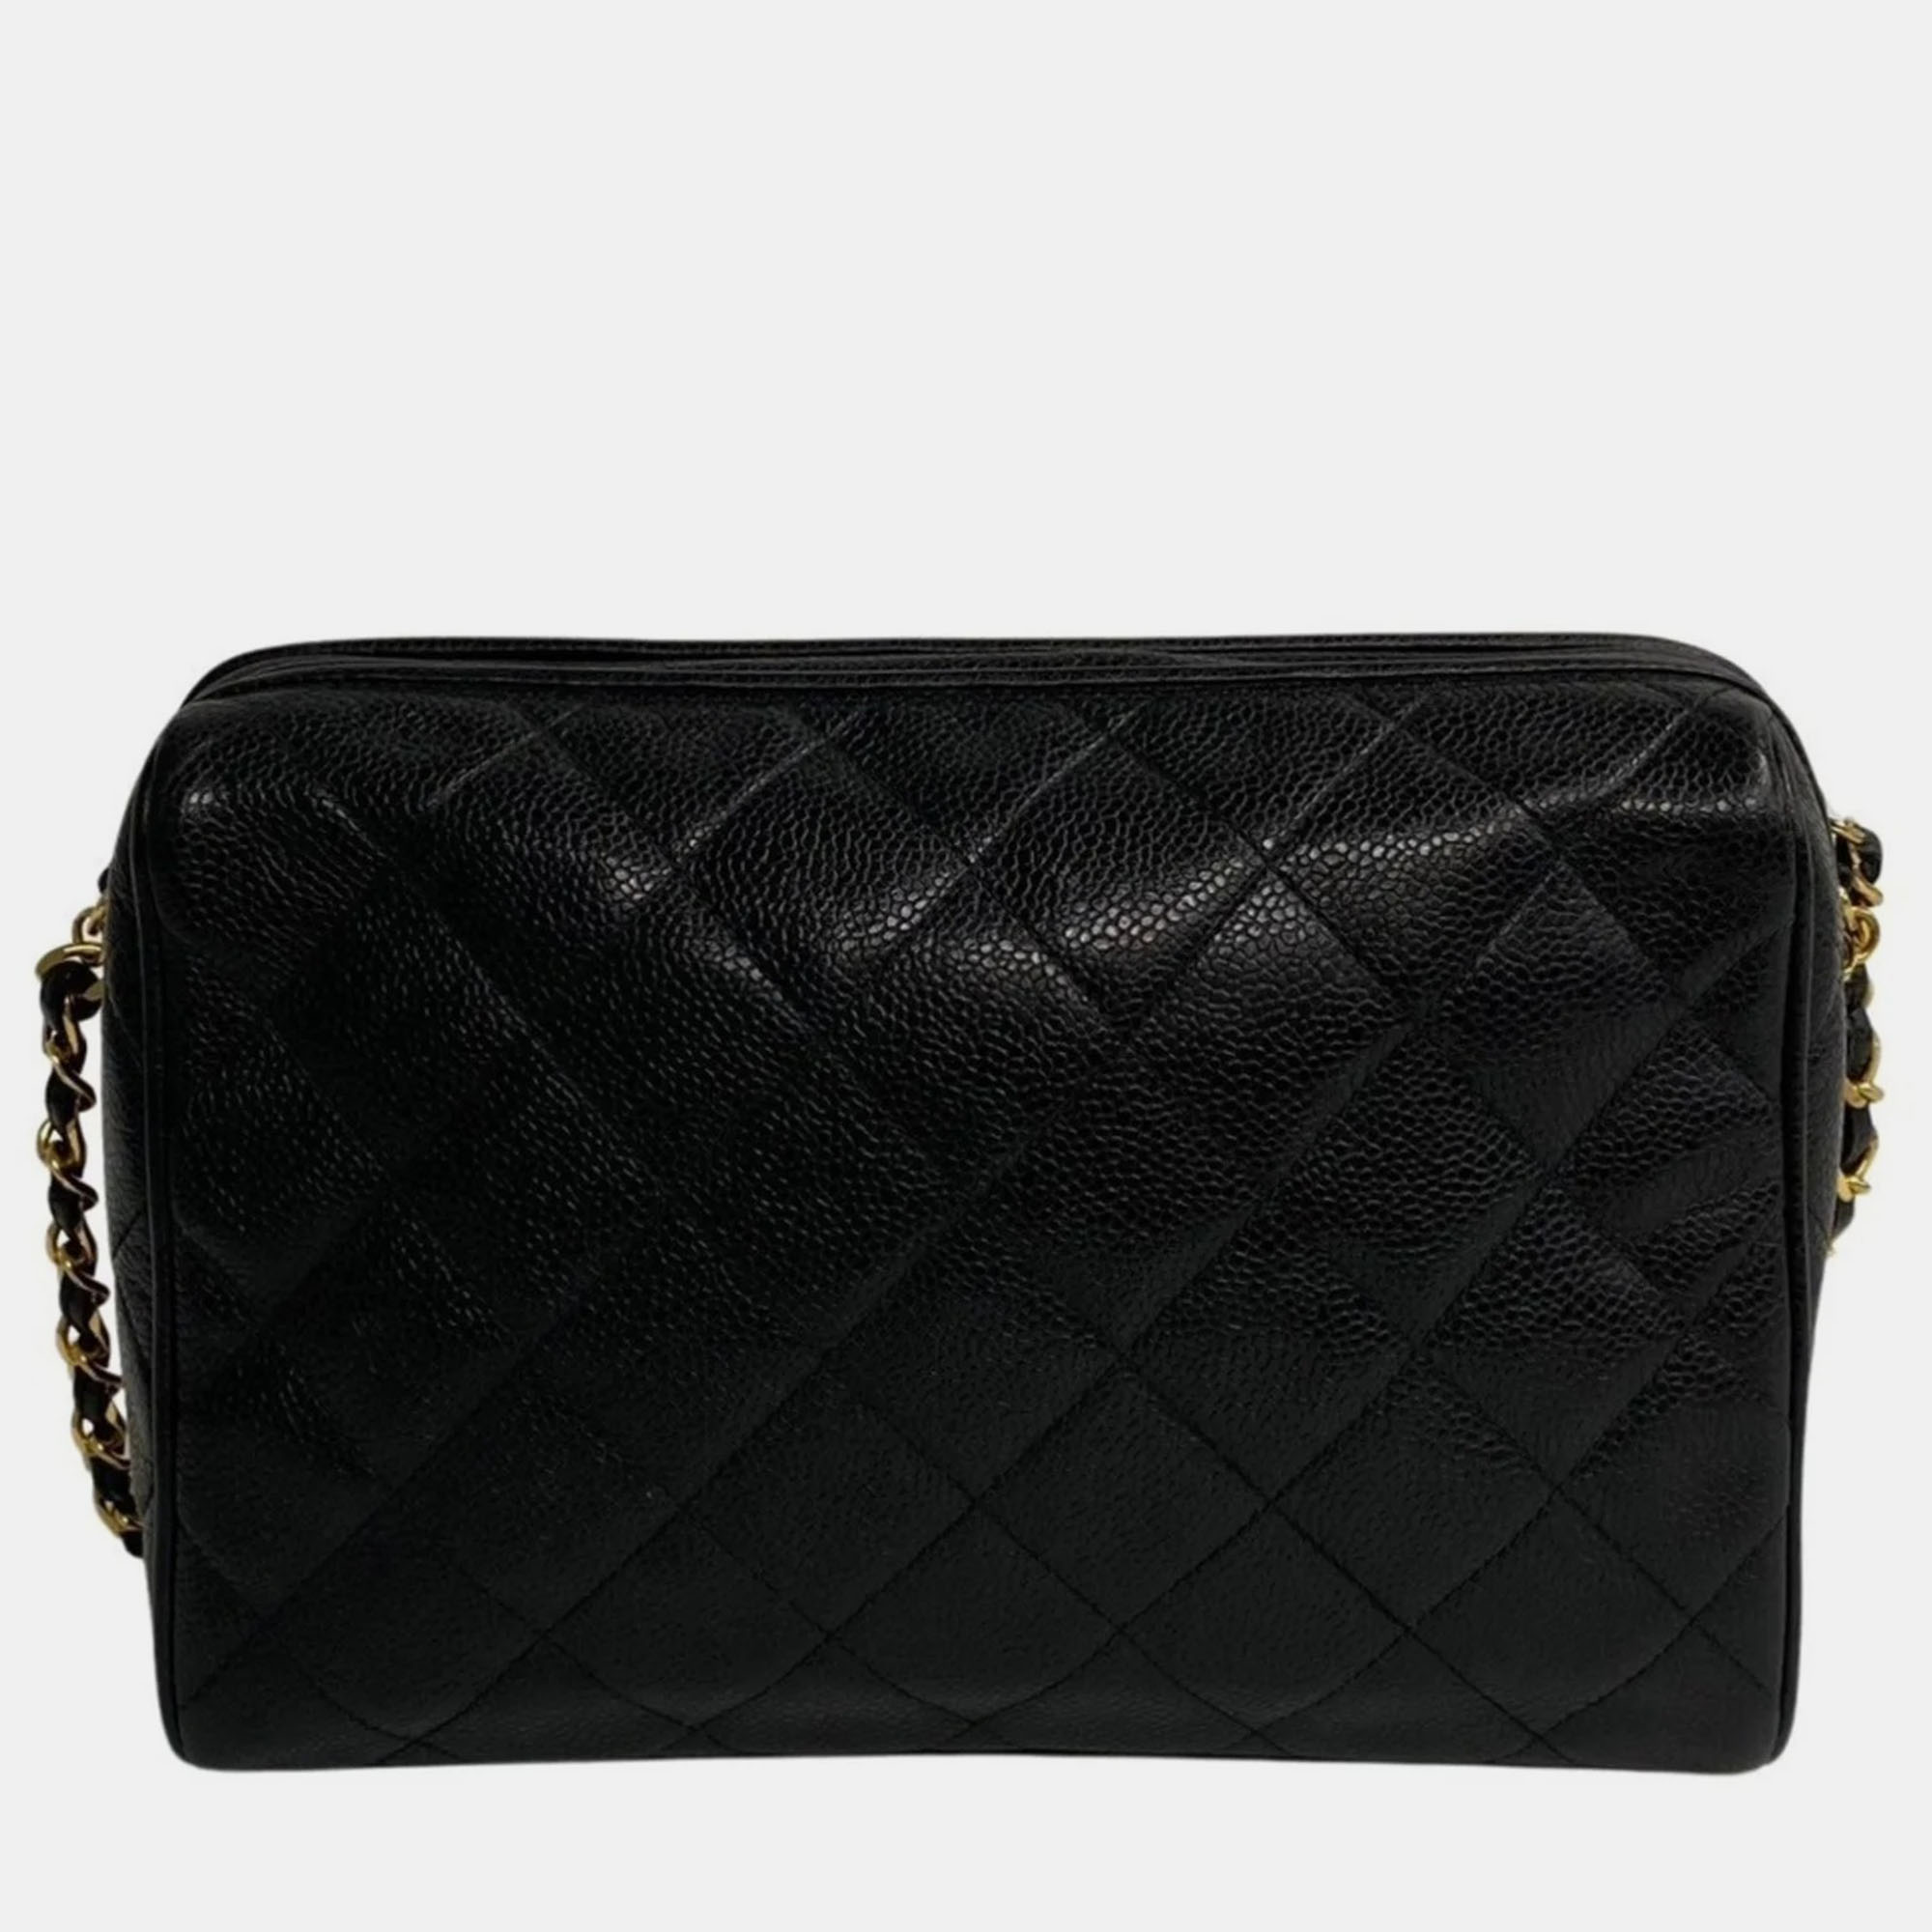 Indulge in timeless elegance with this Chanel shoulder bag meticulously crafted to perfection. Its exquisite details and luxurious materials make it a statement piece for any sophisticated ensemble.